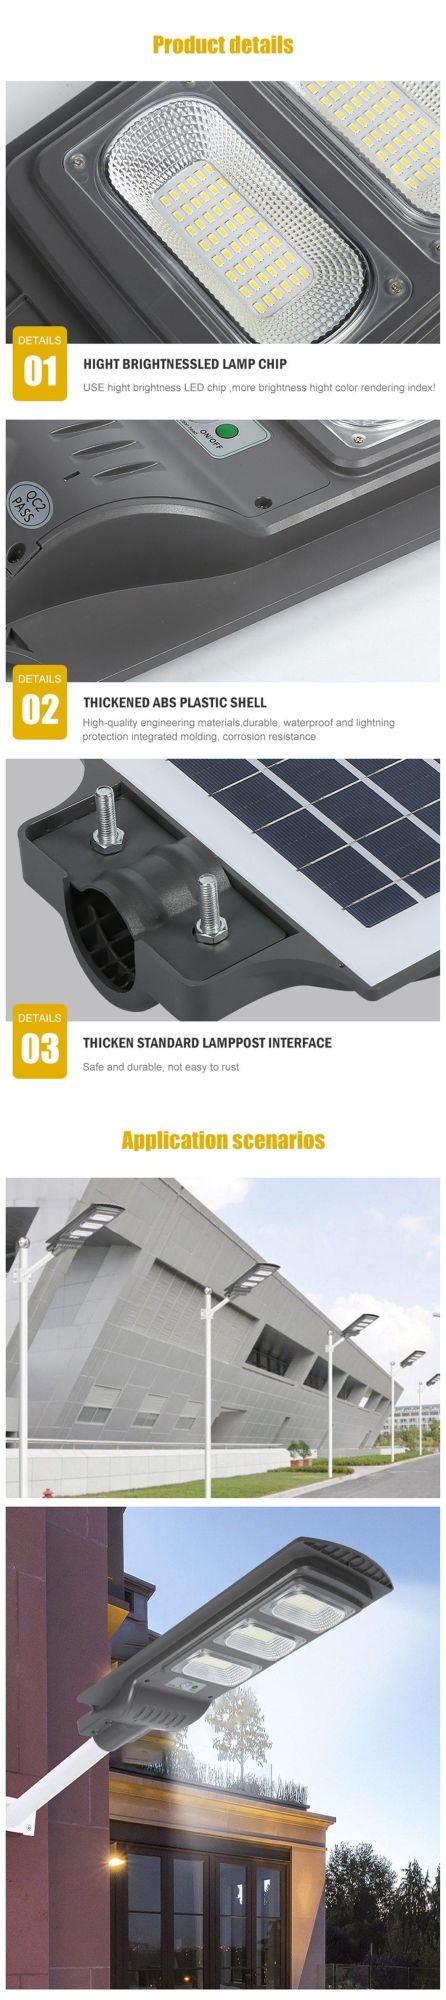 CE RoHS Certification All in One 30W 60W 90W 120W Integrated Solar LED Street Light